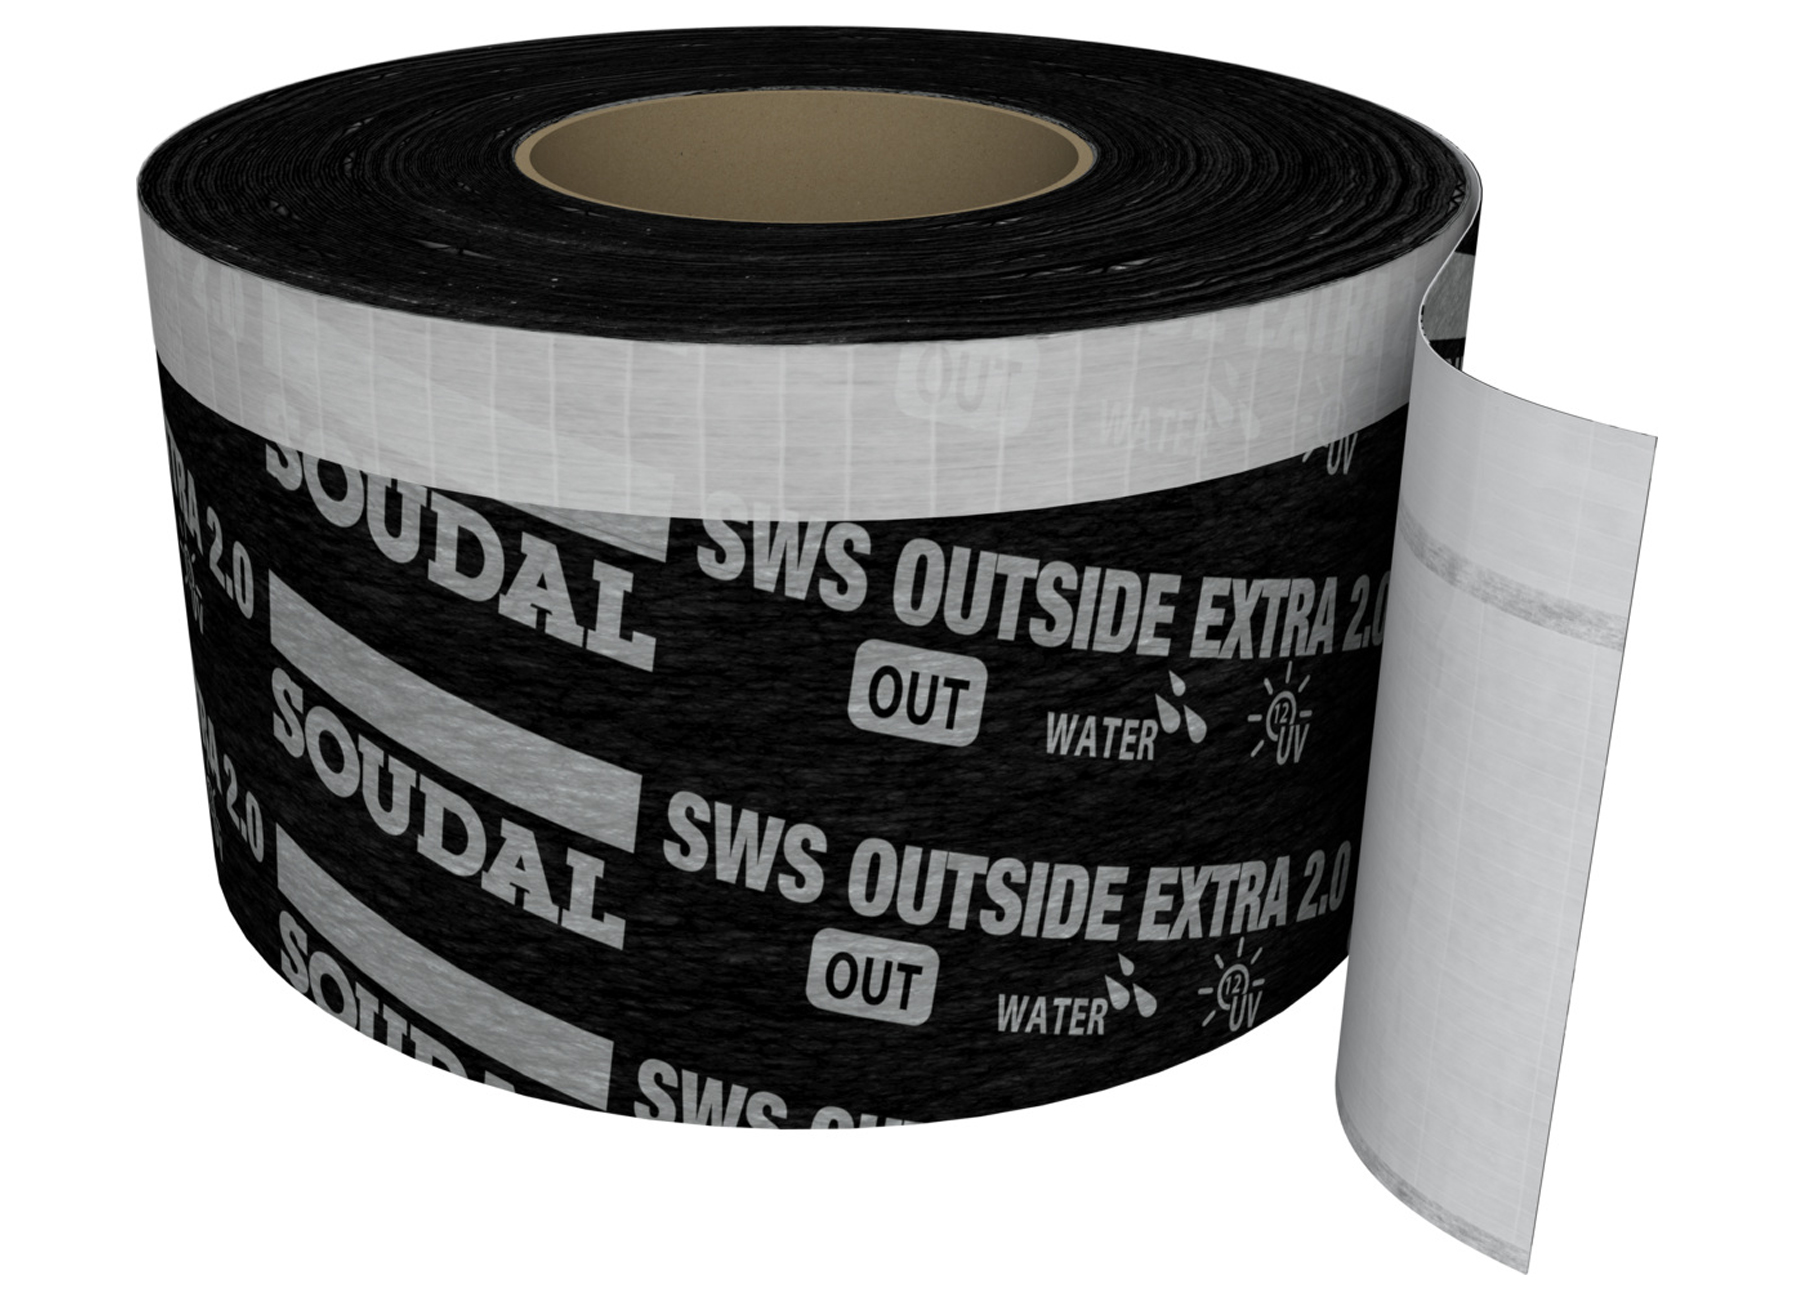 SOUDAL SWS OUTSIDE EXTRA 2.0 70MM